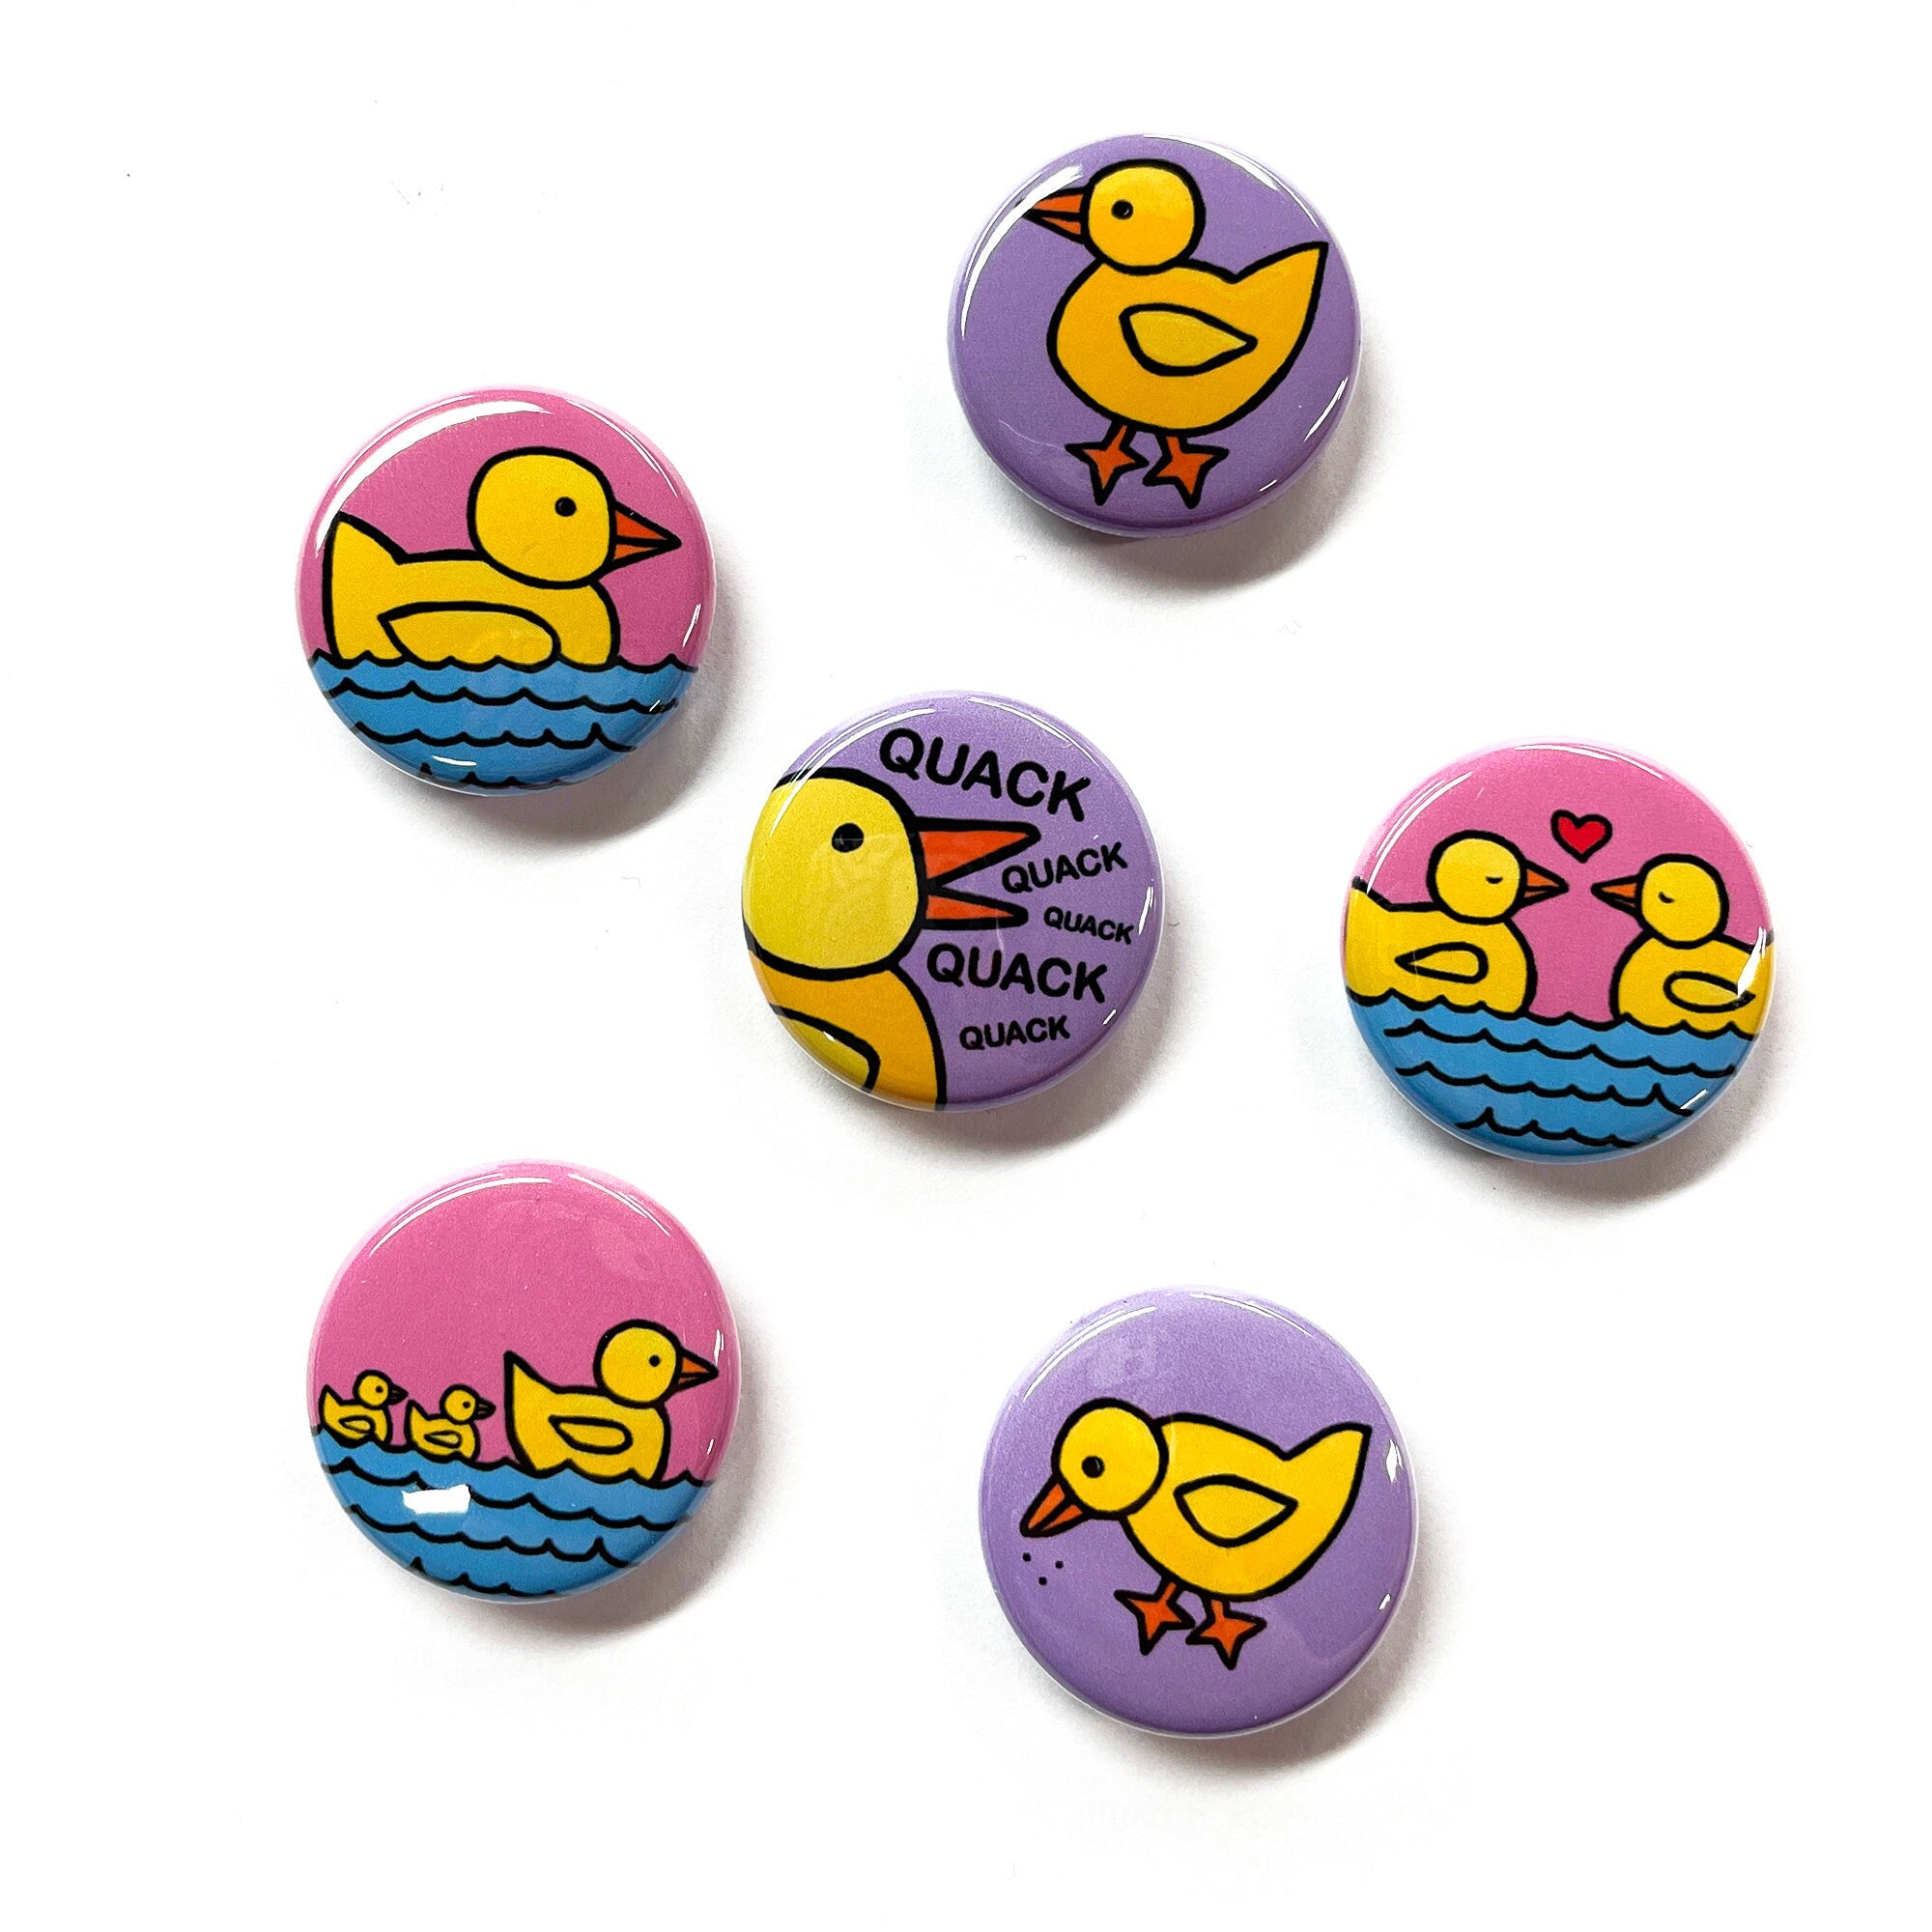 6 yellow duck designs on pink or purple